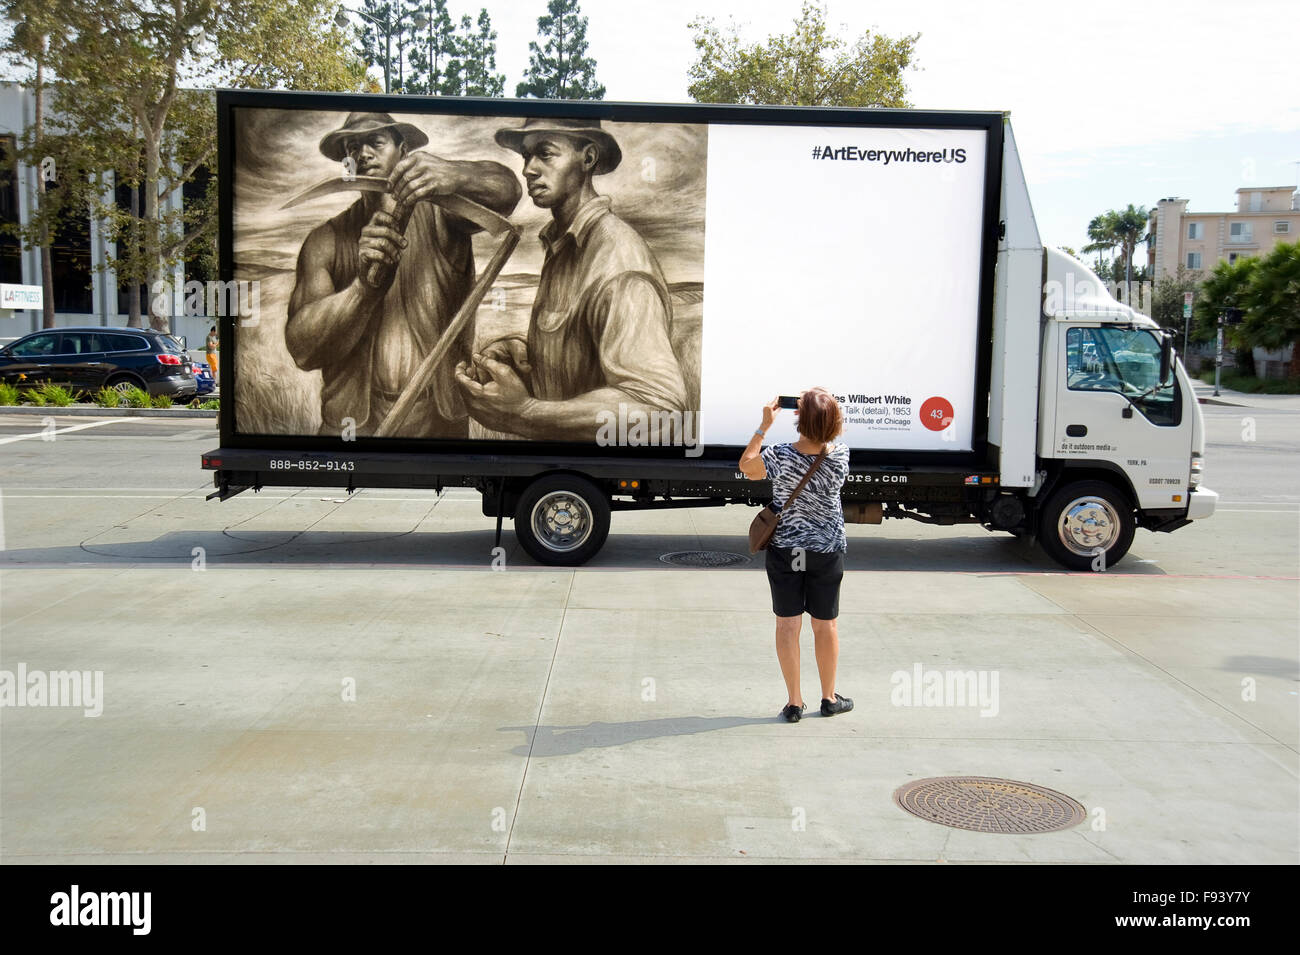 A Charles Wilbert White painting is reproduced on a mobile billboard during the Art Everywhere/ event in Los Angeles, California Stock Photo